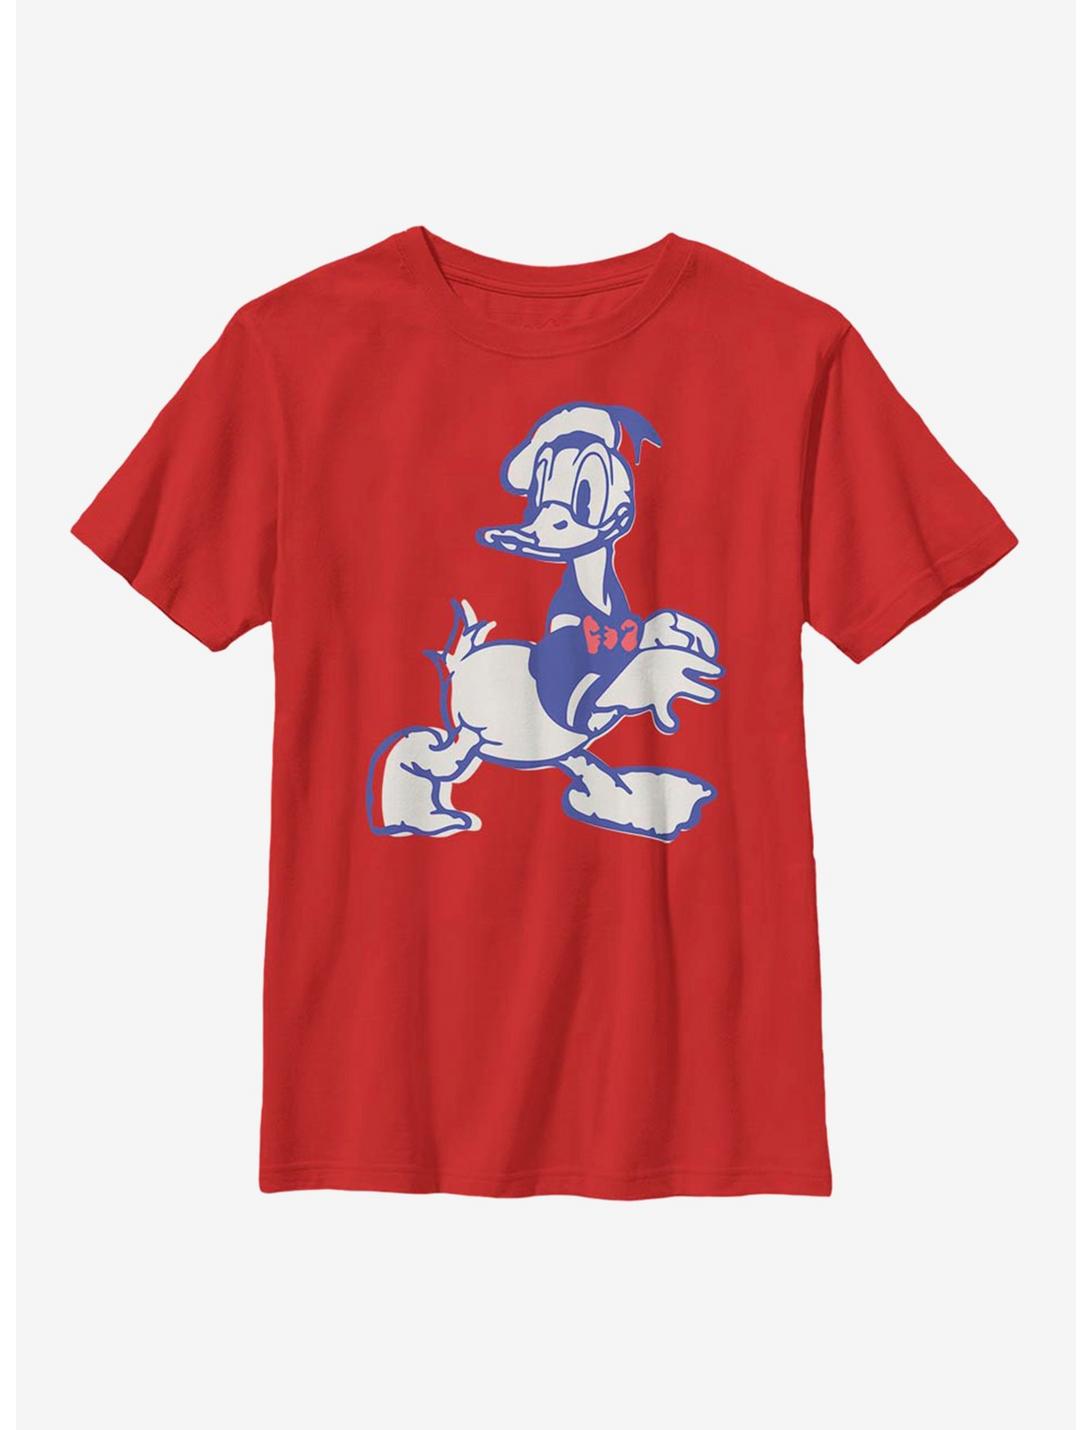 Disney Donald Duck Donald Heritage Youth T-Shirt, RED, hi-res